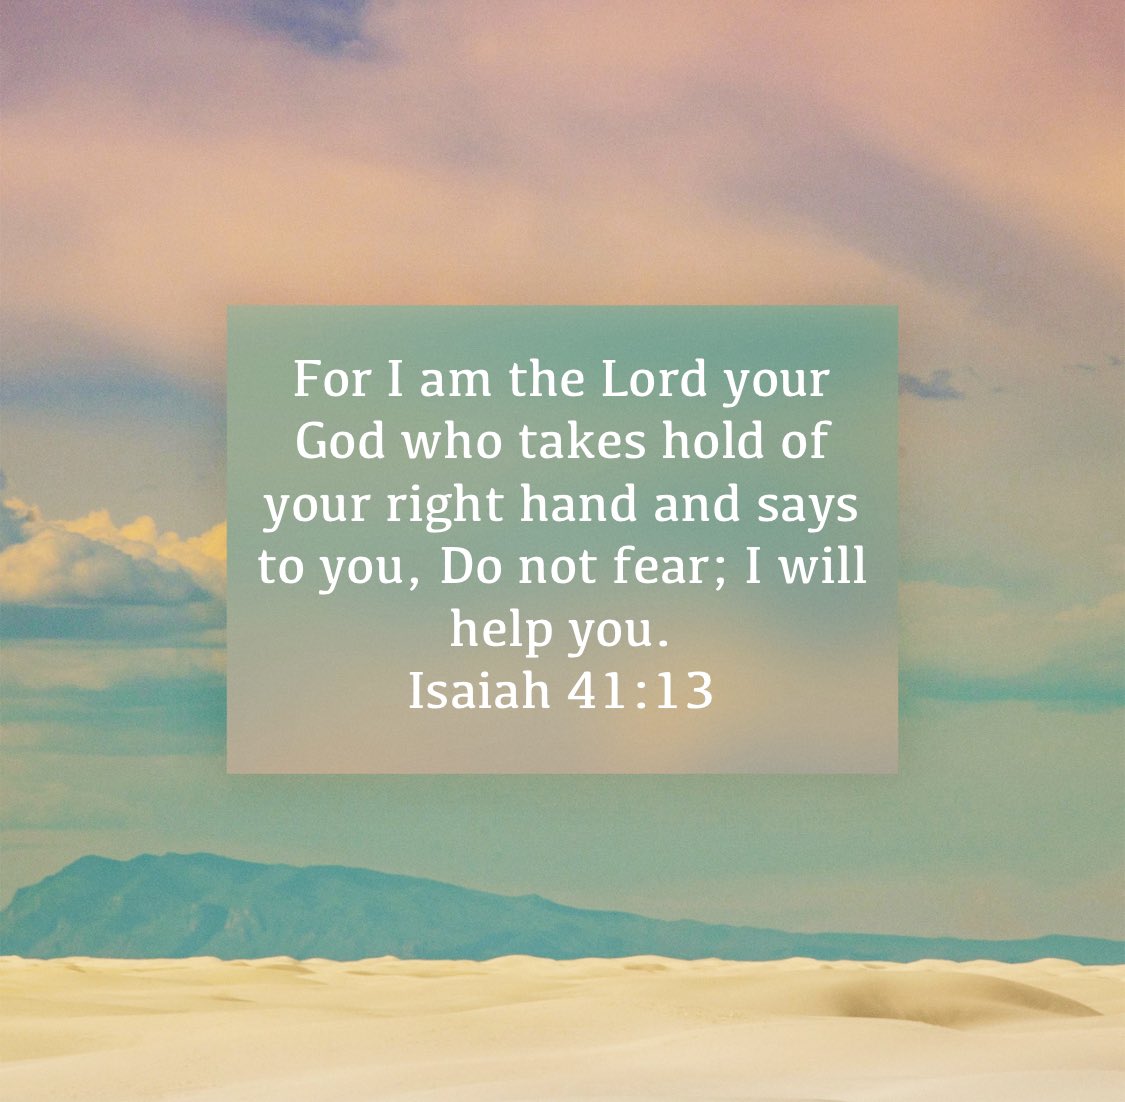 “For I am the Lord your God who takes hold of your right hand and says to you, Do not fear; I will help you.”
Isaiah 41:13 NIV

bible.com/bible/111/isa.…

#Amen 🙏🏼 #GodIsGood 🙌🏼
#DoNotFear #TrustGodsPlan #HeHasMyHand 

#InfernoMob 🔥 
#PatriotsCross ✝️
#UnitedWeStand 🗽
#UWS369 🇺🇸